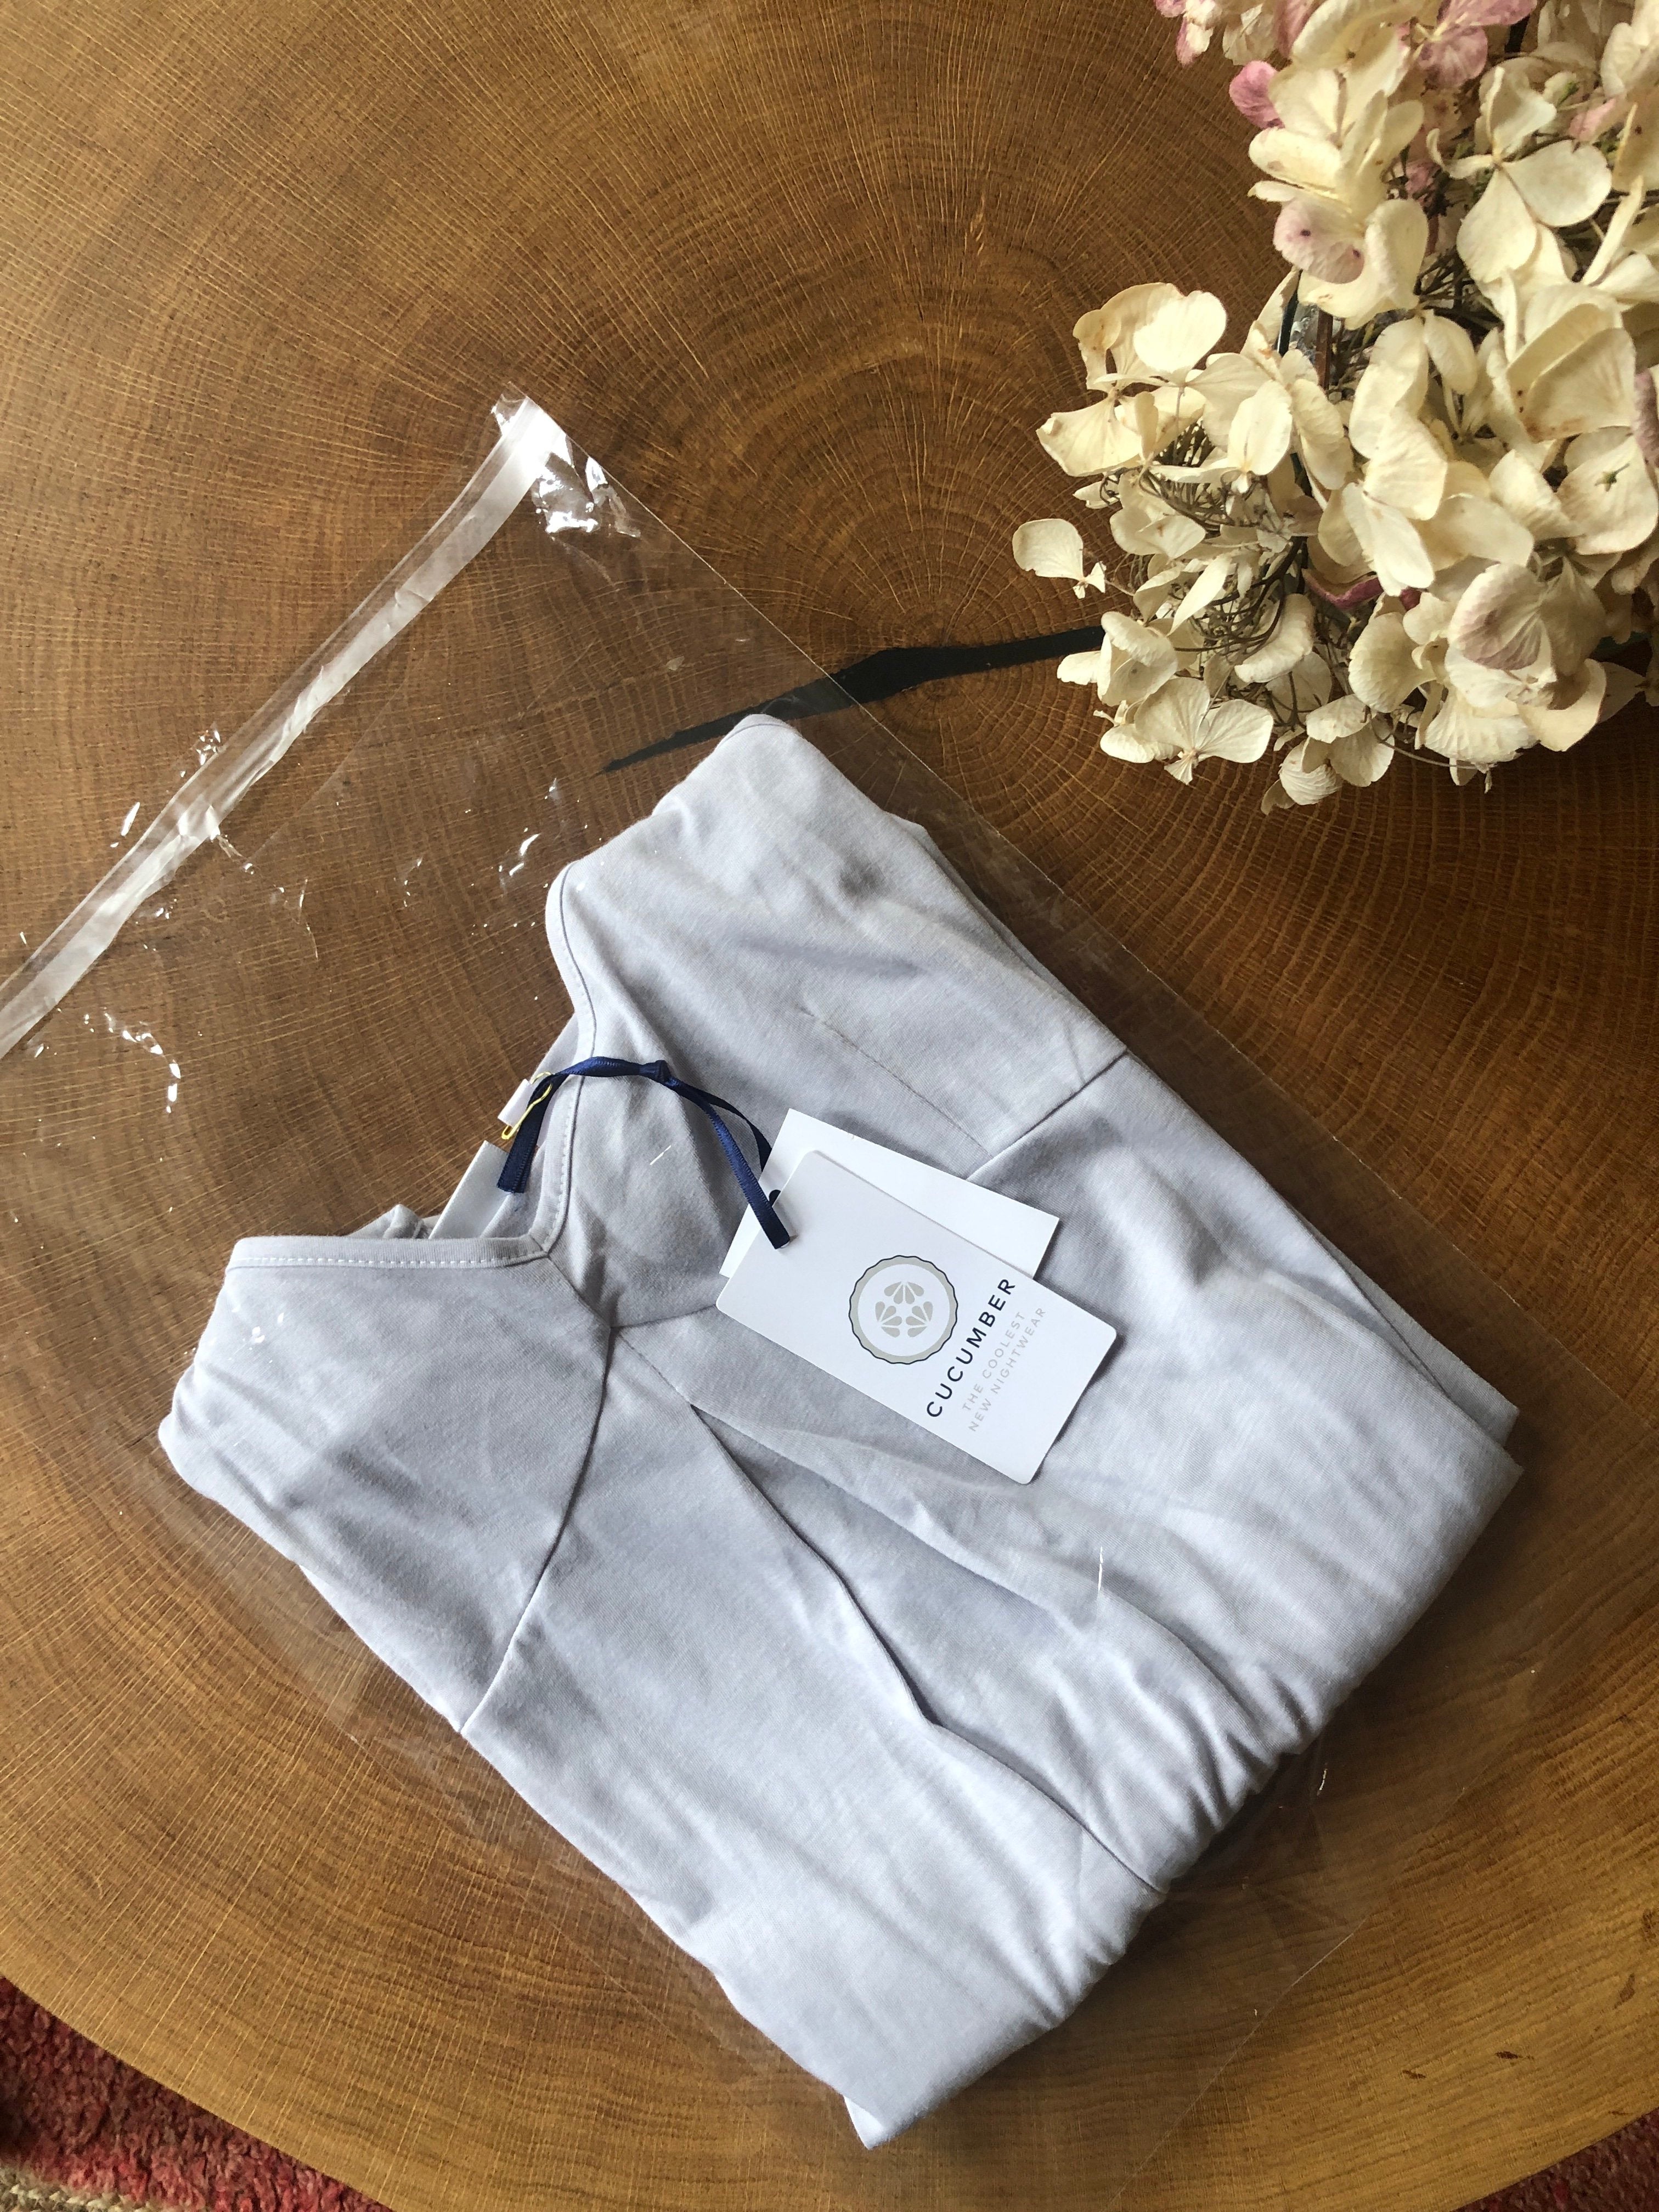 Cucumber Clothing 100% vegetable starch biodegradable, compostable bags for their wicking, cooling, anti-crease everyday luxury sleepwear and clothing brand